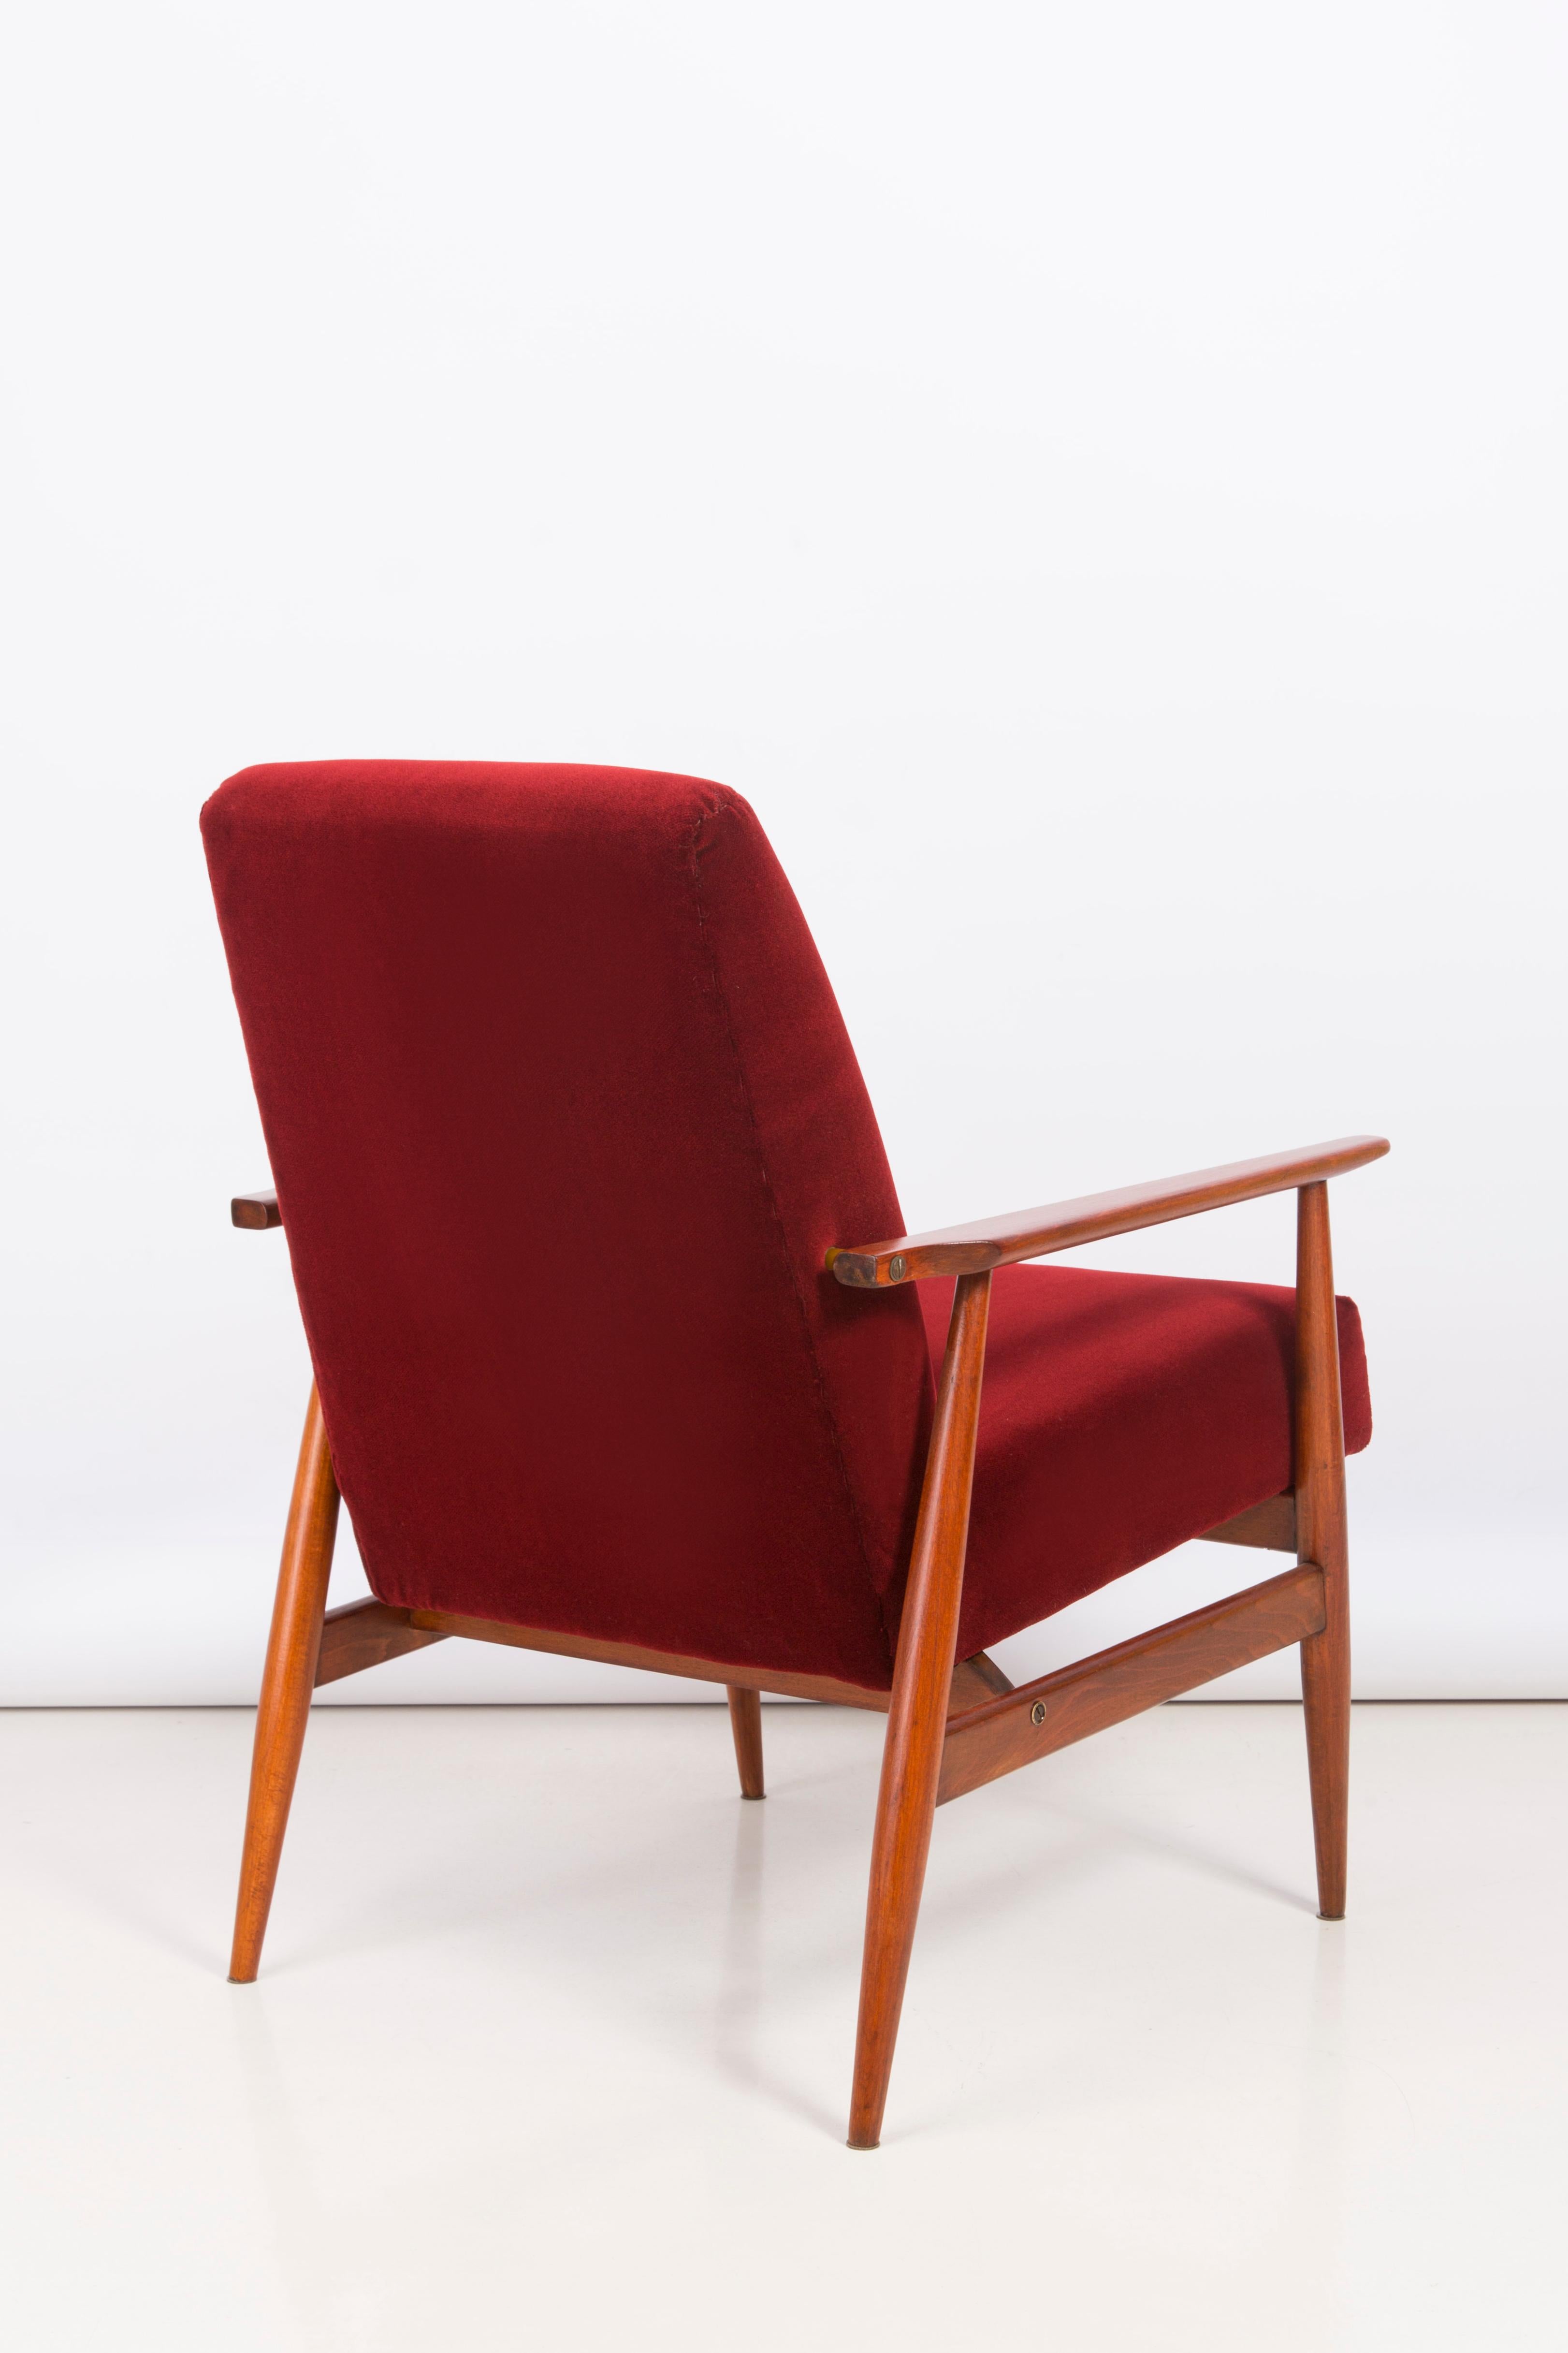 Set of Two 20th Century Burgundy Dark Red Dante Armchairs, H. Lis, 1960s For Sale 2